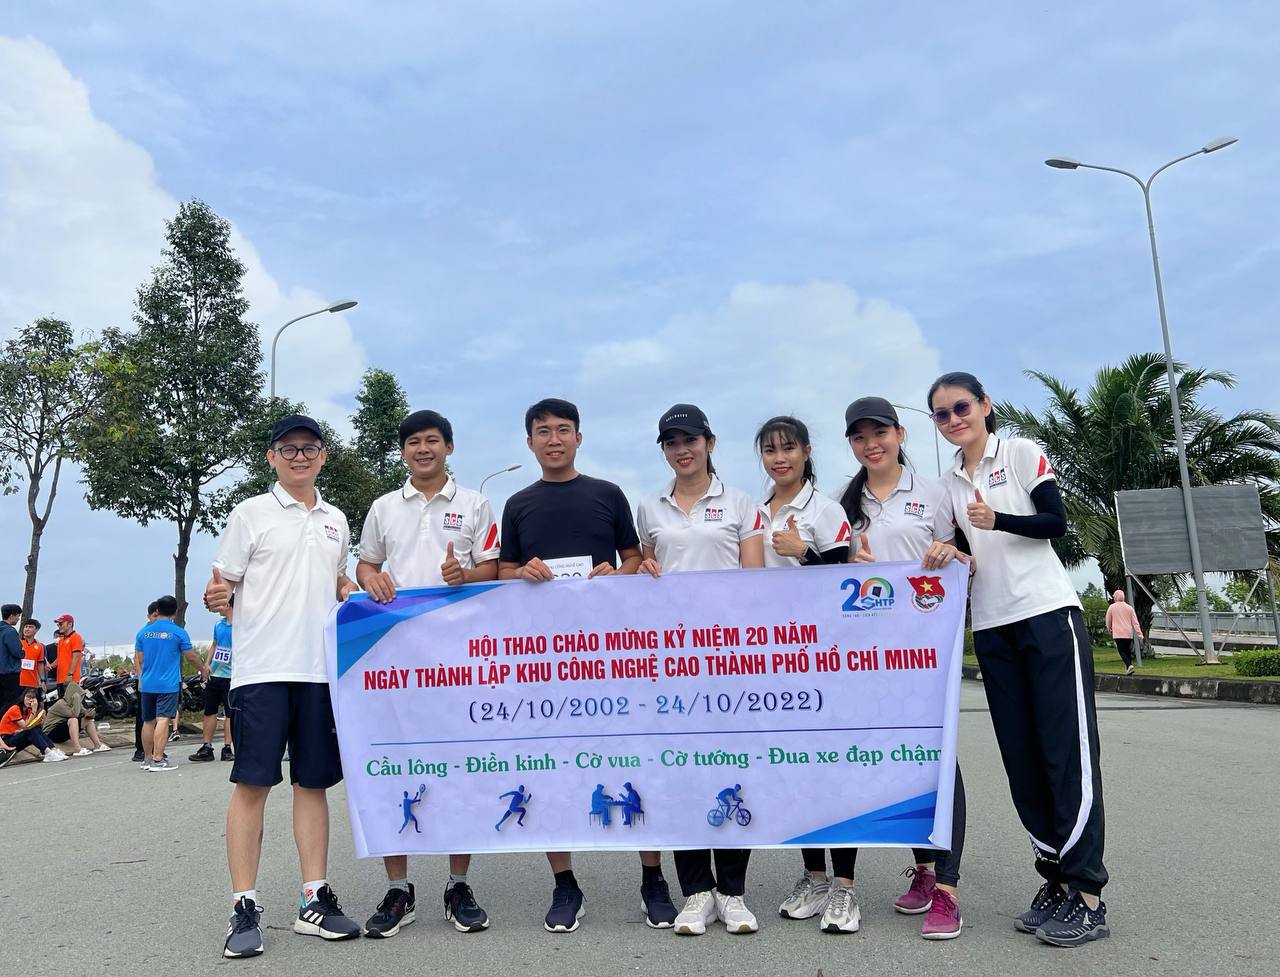 SCS participated in the cross-country race in the Sports Festival to celebrate the 20th anniversary of the establishment of Ho Chi Minh City High-Tech Park (October 24, 2002 - October 24, 2022)